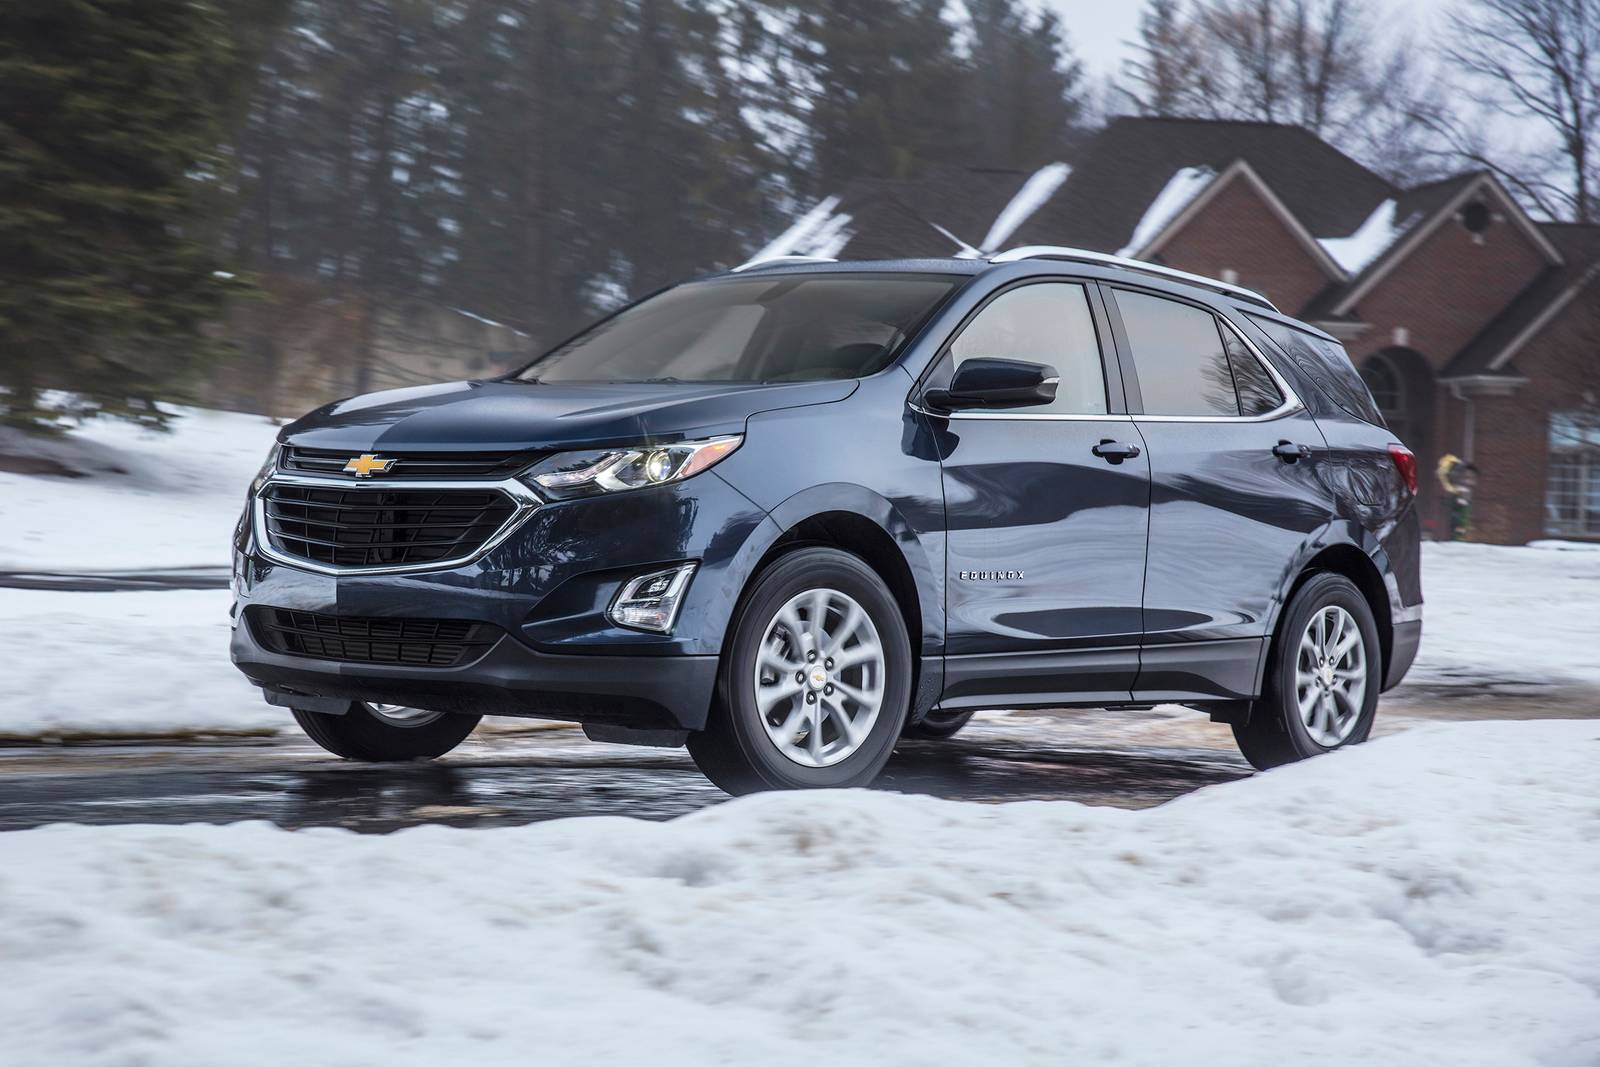 2019 Chevy Equinox Review & Ratings | Edmunds